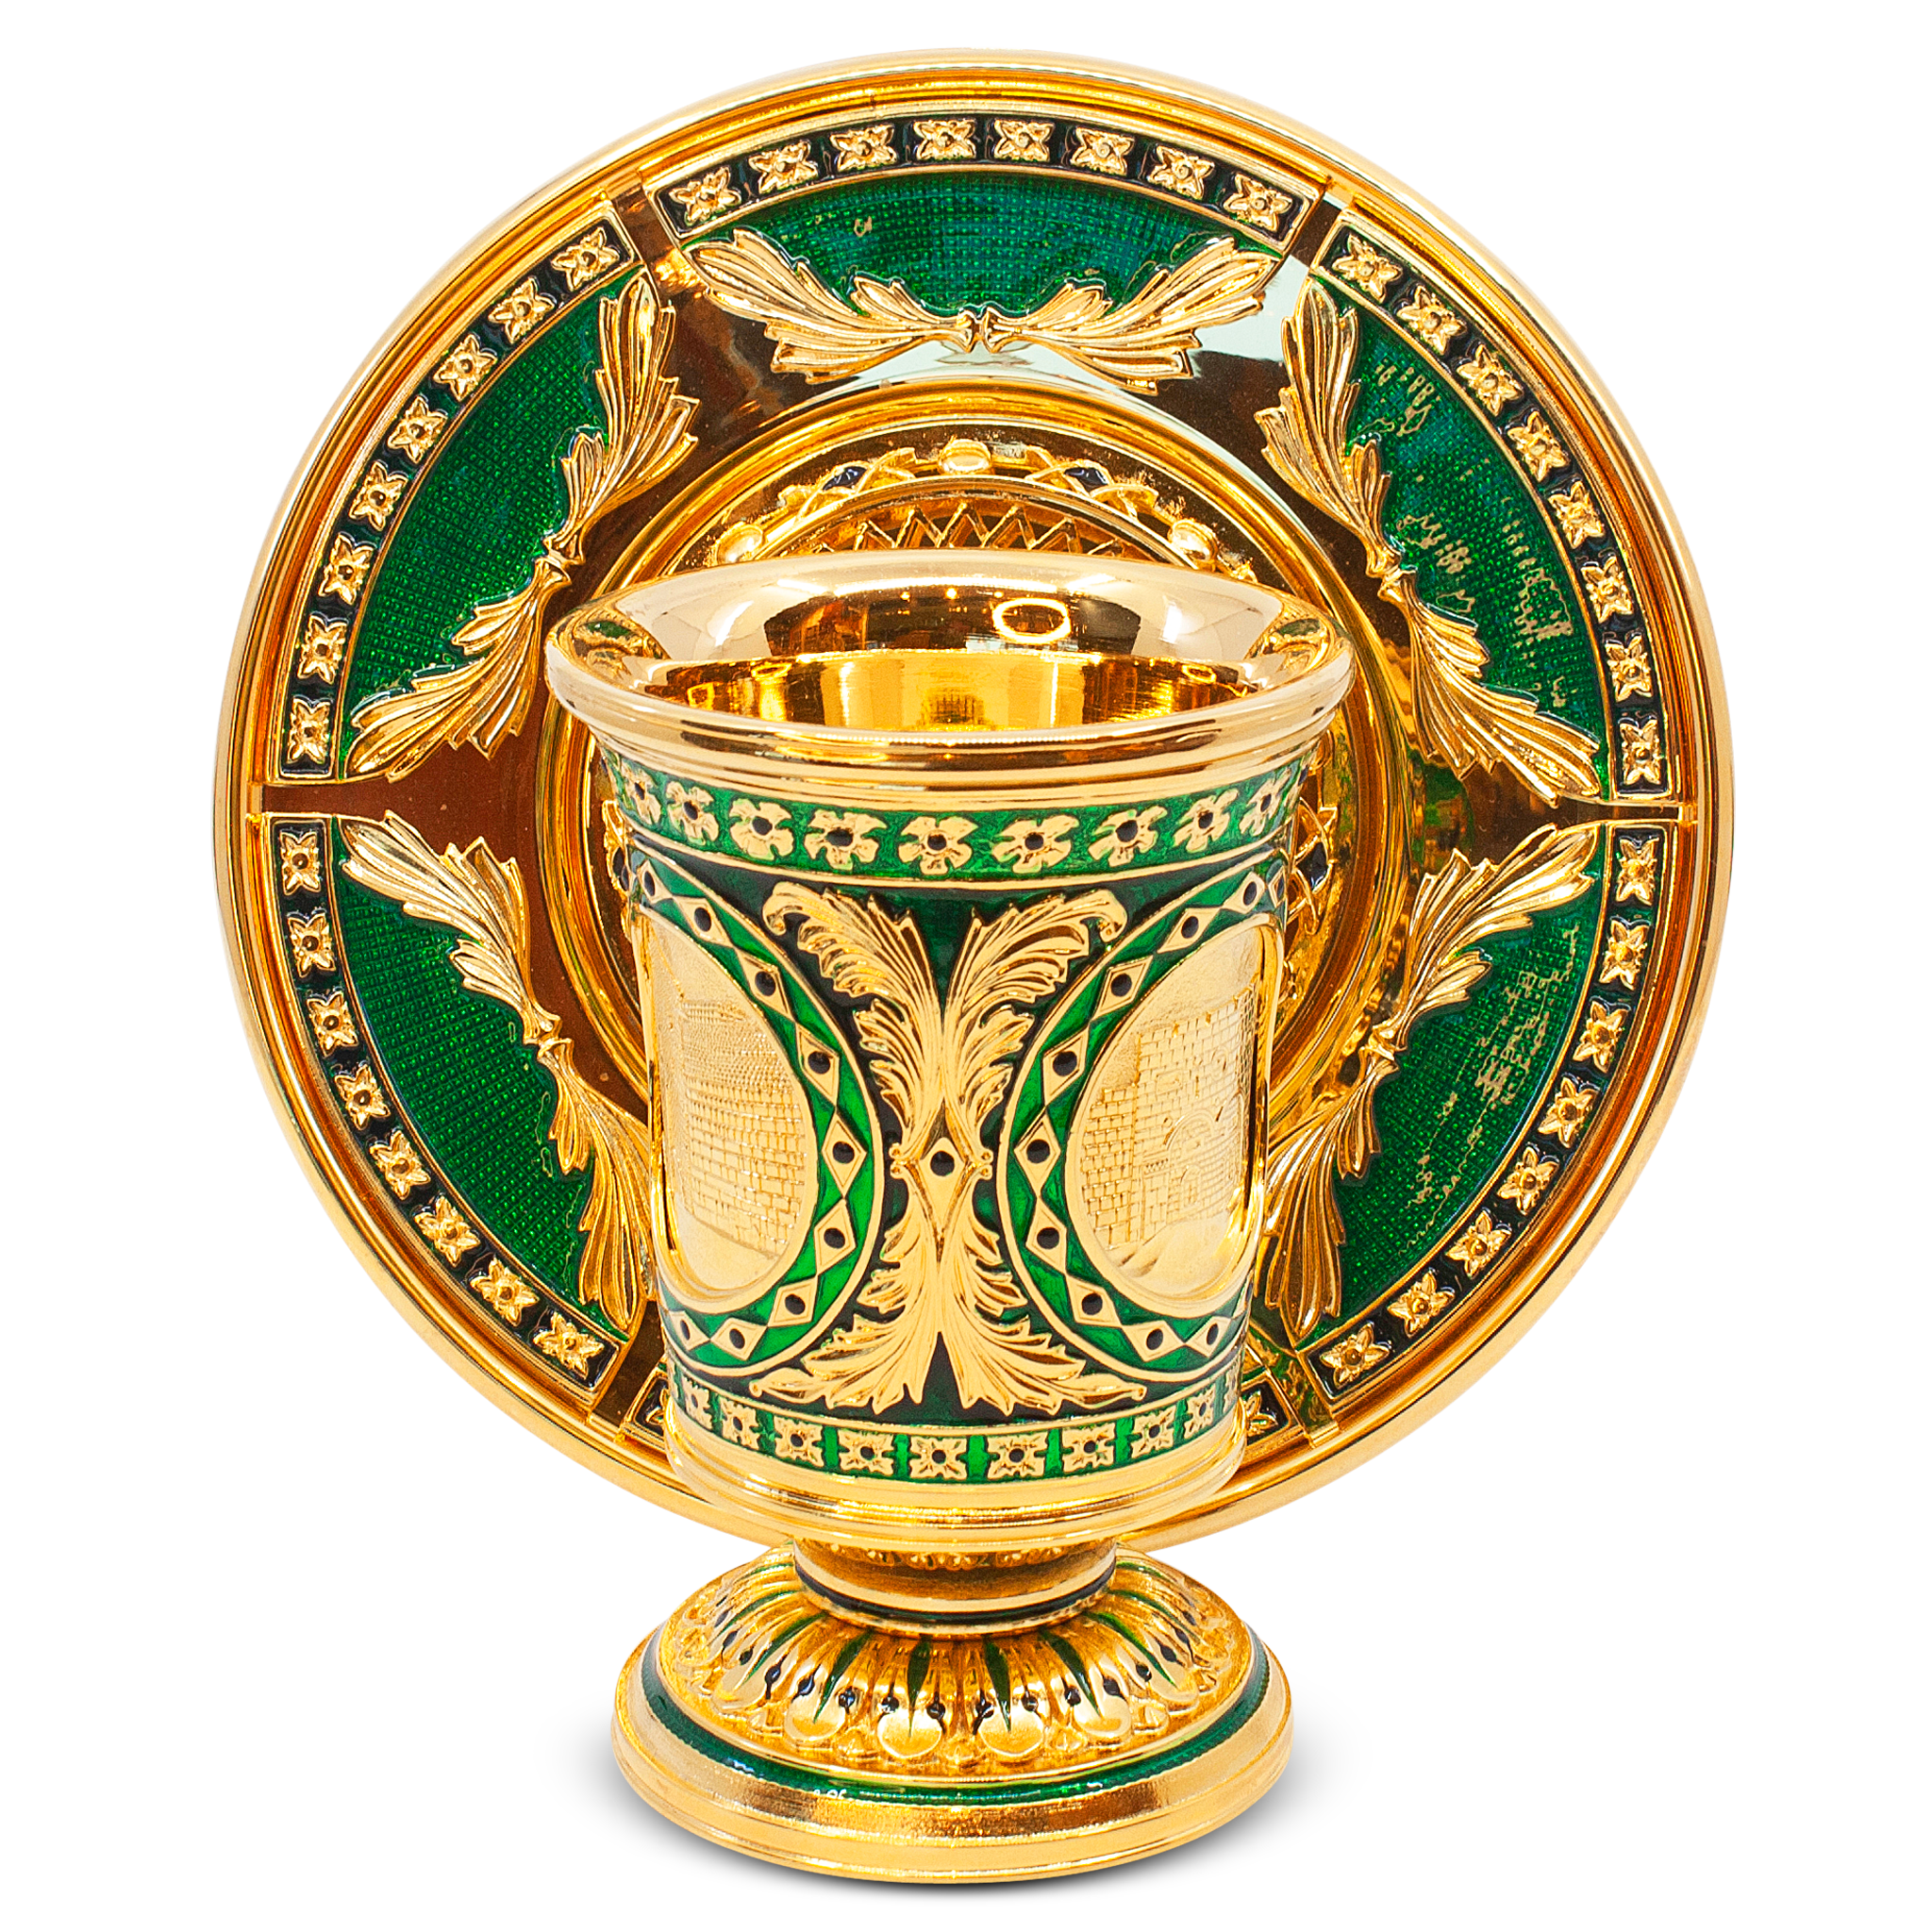 Gold and green kiddush cup